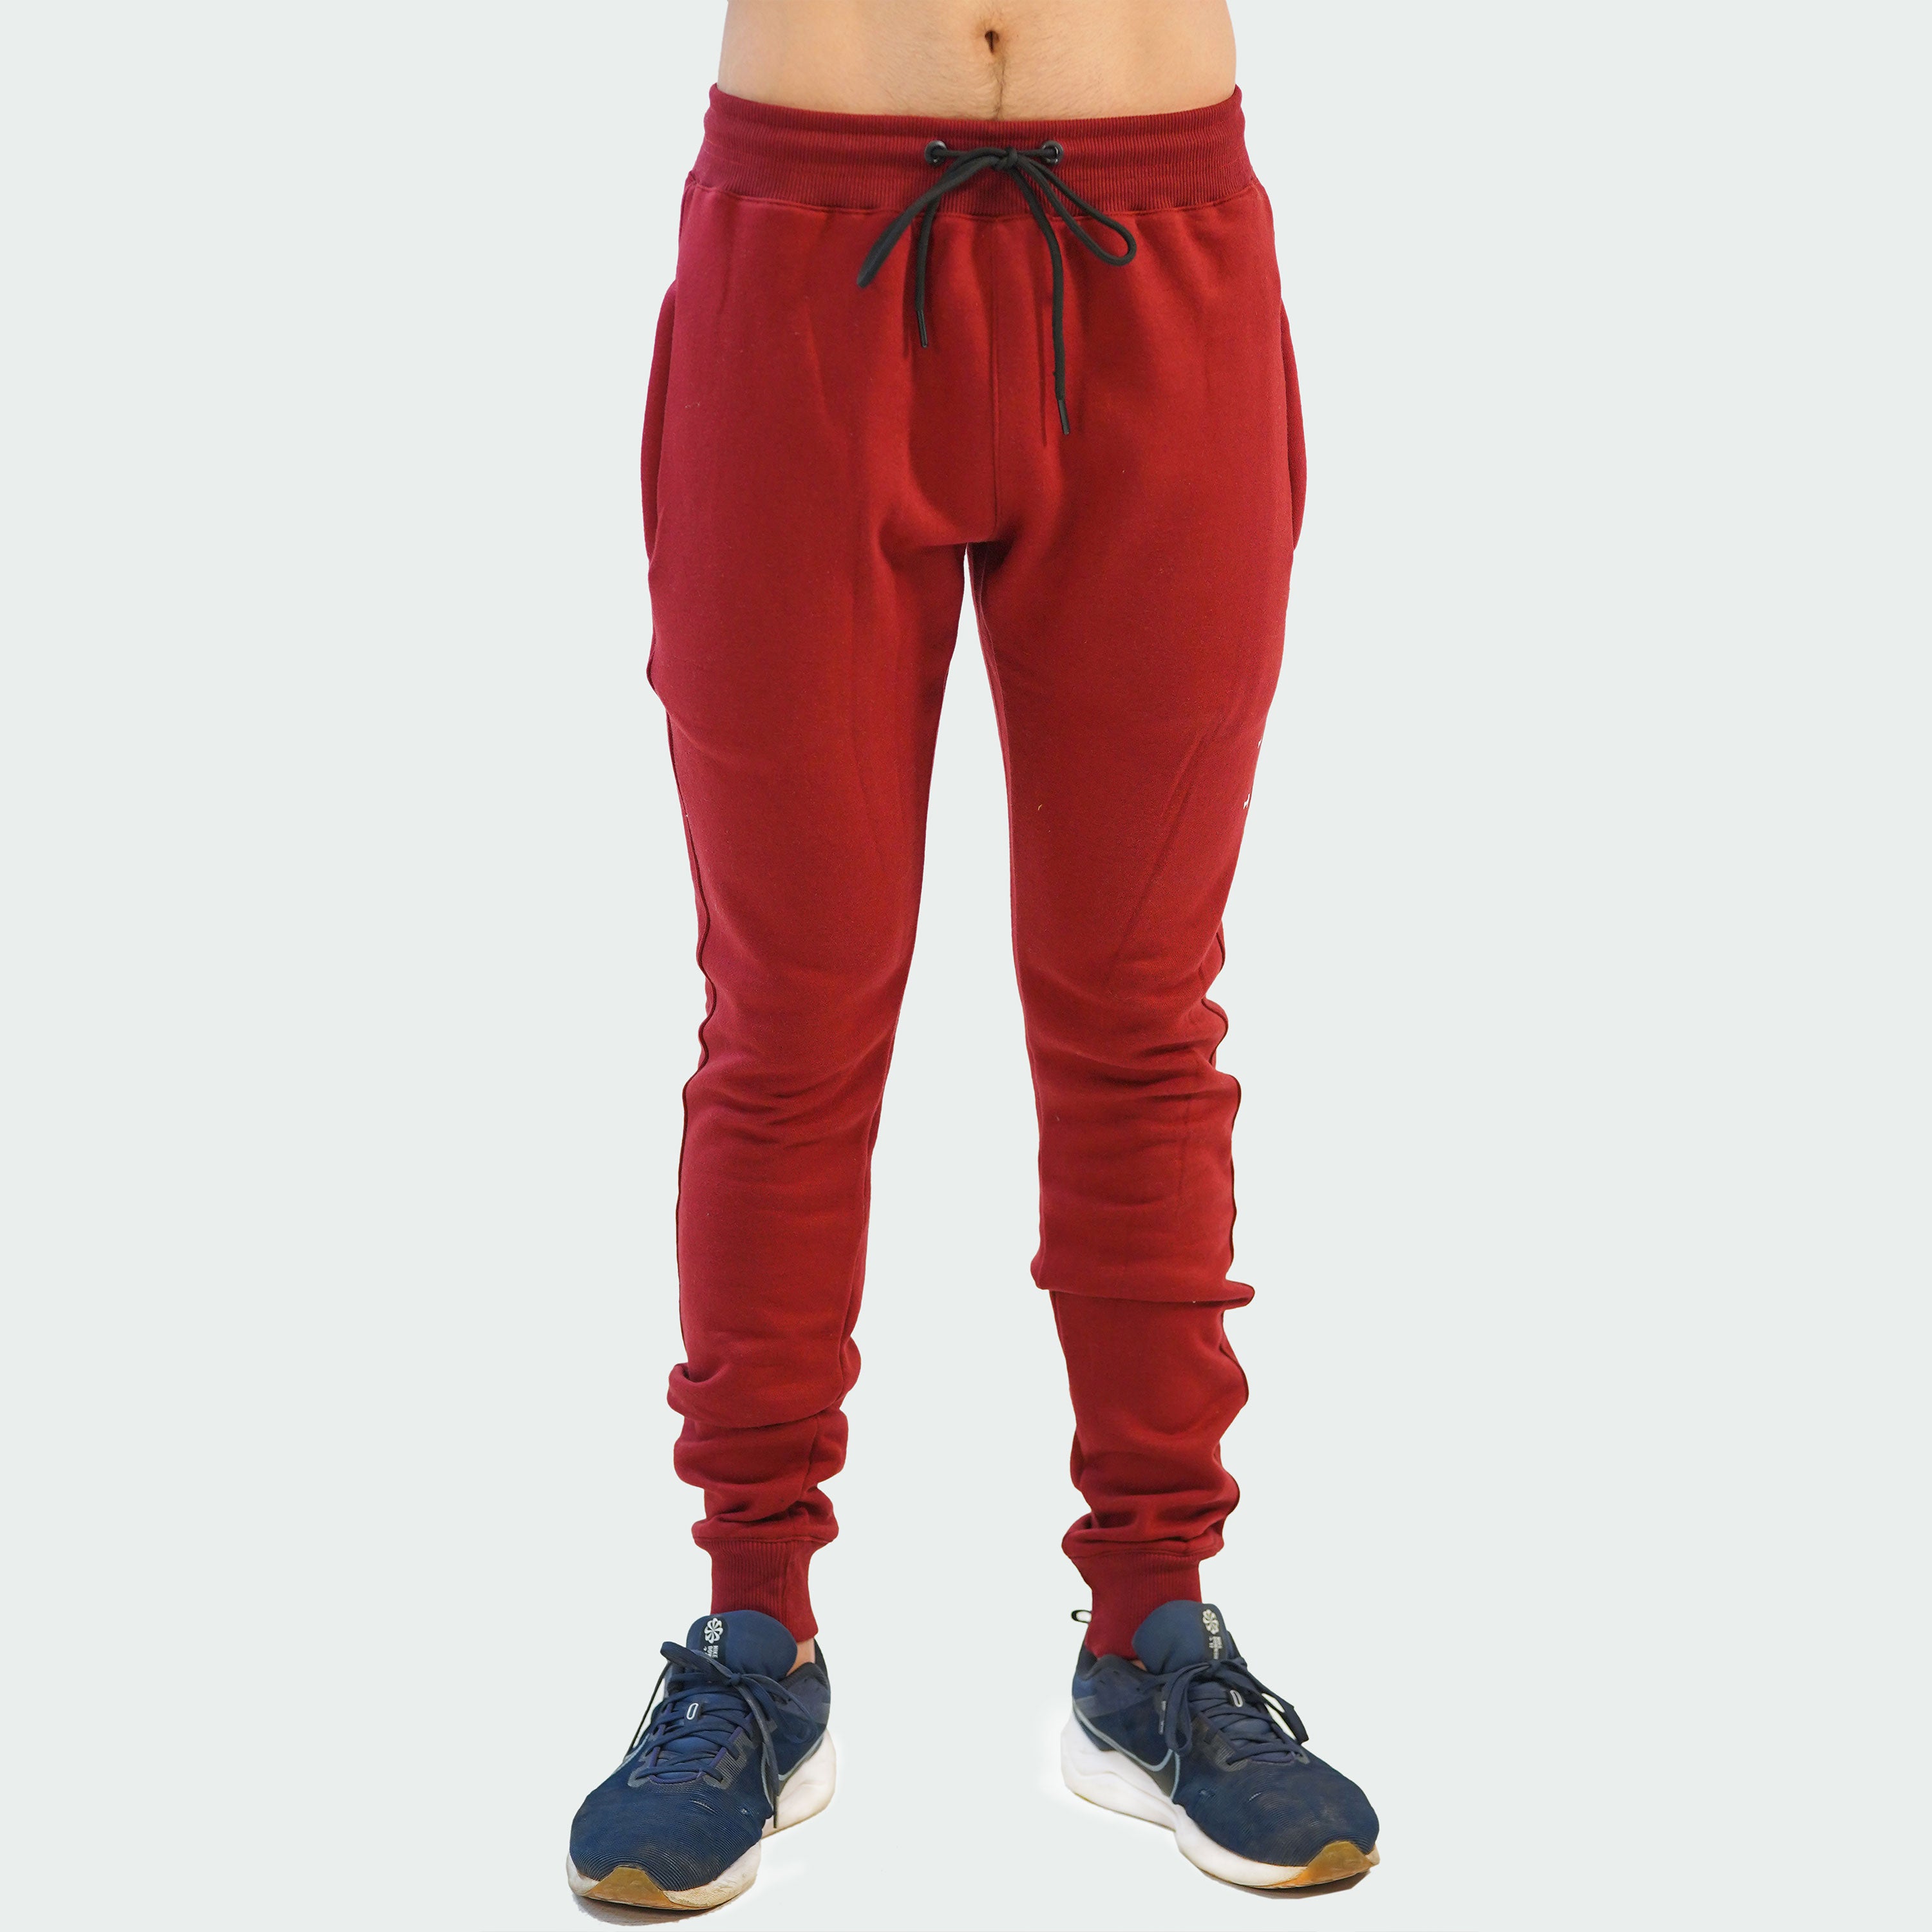 Comfy Warm Trousers - Red